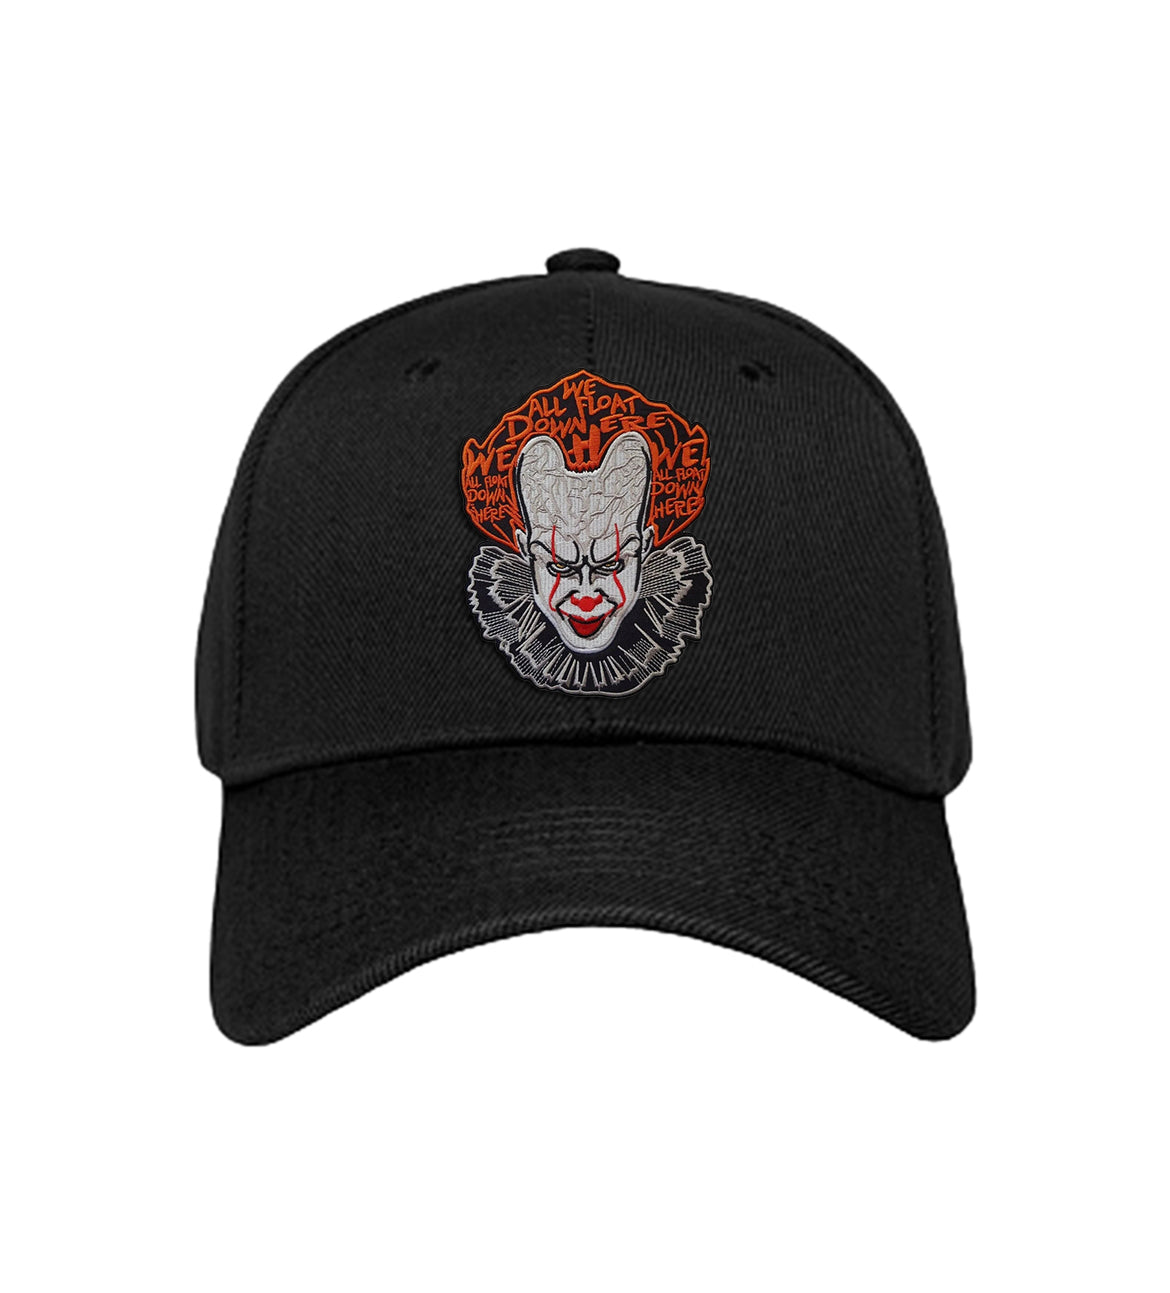 Pennywise The Dancing Clown Patch (3.5 Inch)  Iron or Sew-on Badge IT Horror Movie Costume Patches